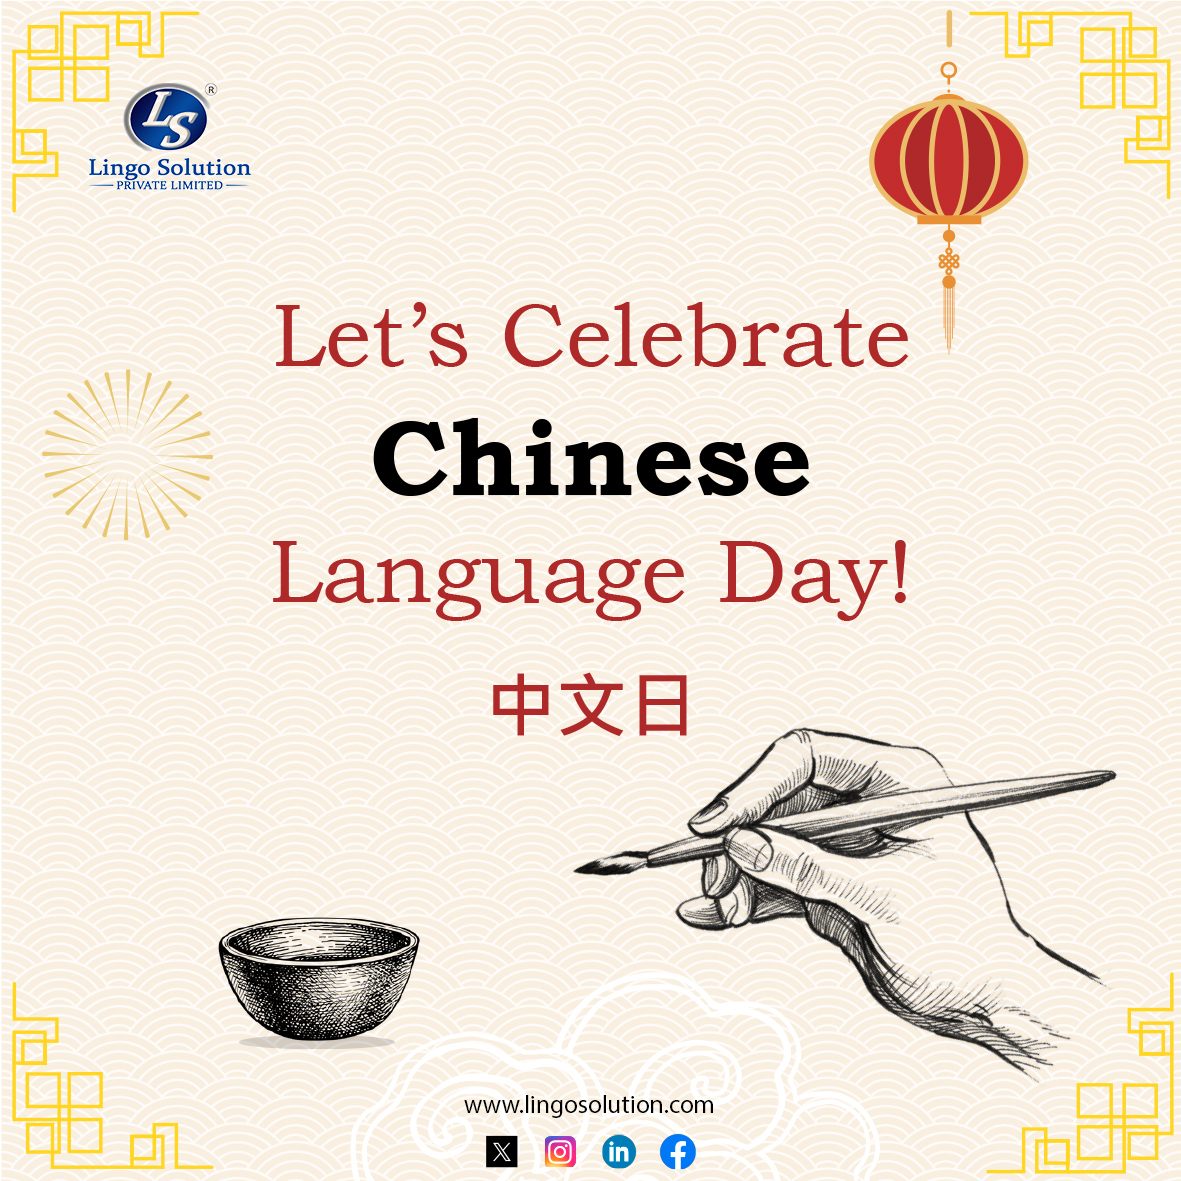 🎉 Happy Chinese Language Day! 🎉
At Lingo Solutions, we celebrate the beauty and richness of the Chinese language. Today, let's honor the diversity of languages and cultures around the world. 
#ChineseLanguageDay #LanguageDiversity #CulturalHeritage #LingoSolutions 🌏📚